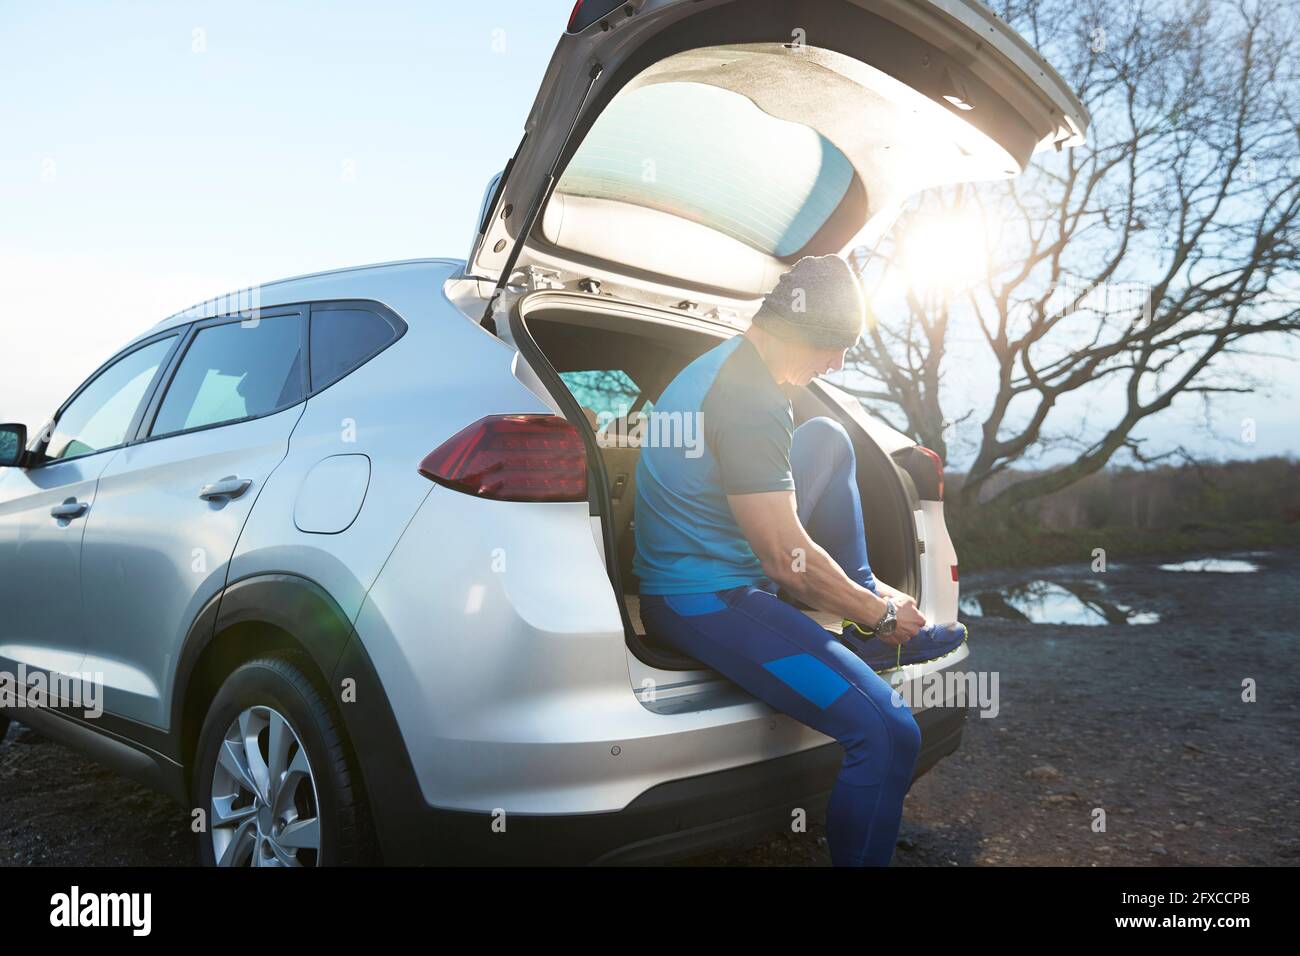 Athlete tying shoelace while sitting in car trunk Stock Photo